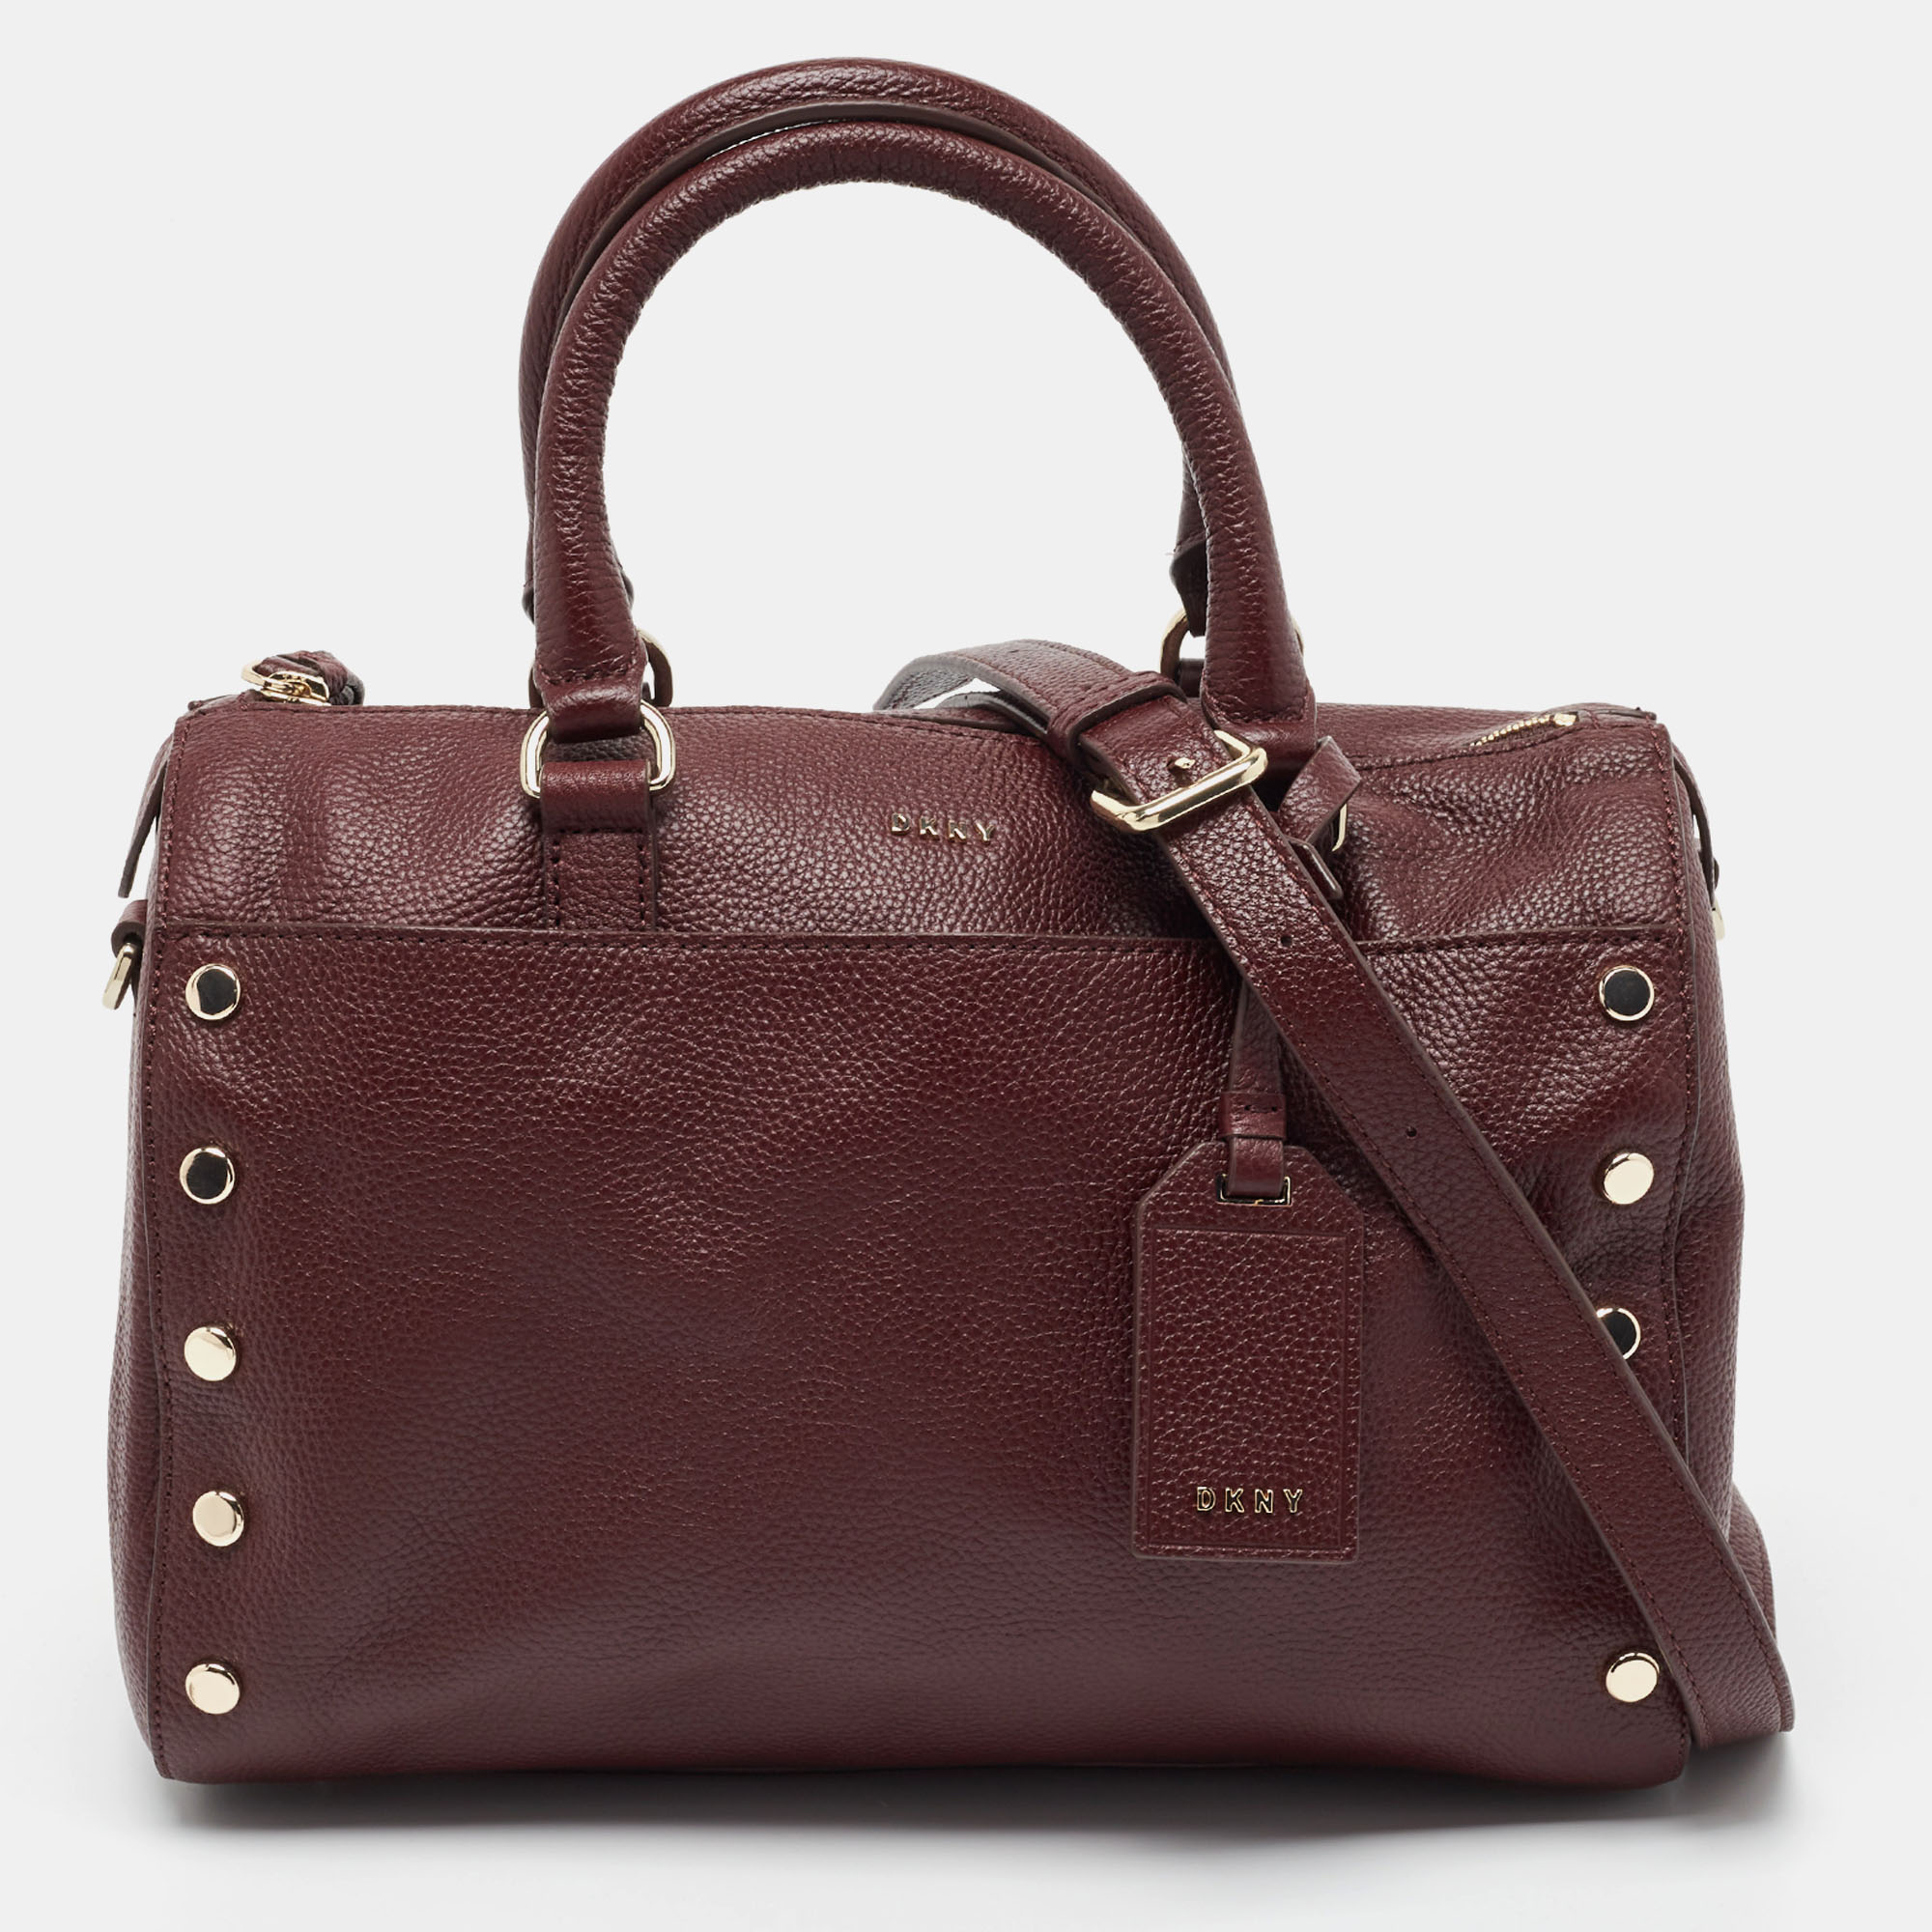 Pre-owned Dkny Burgundy Leather Studded Boston Bag